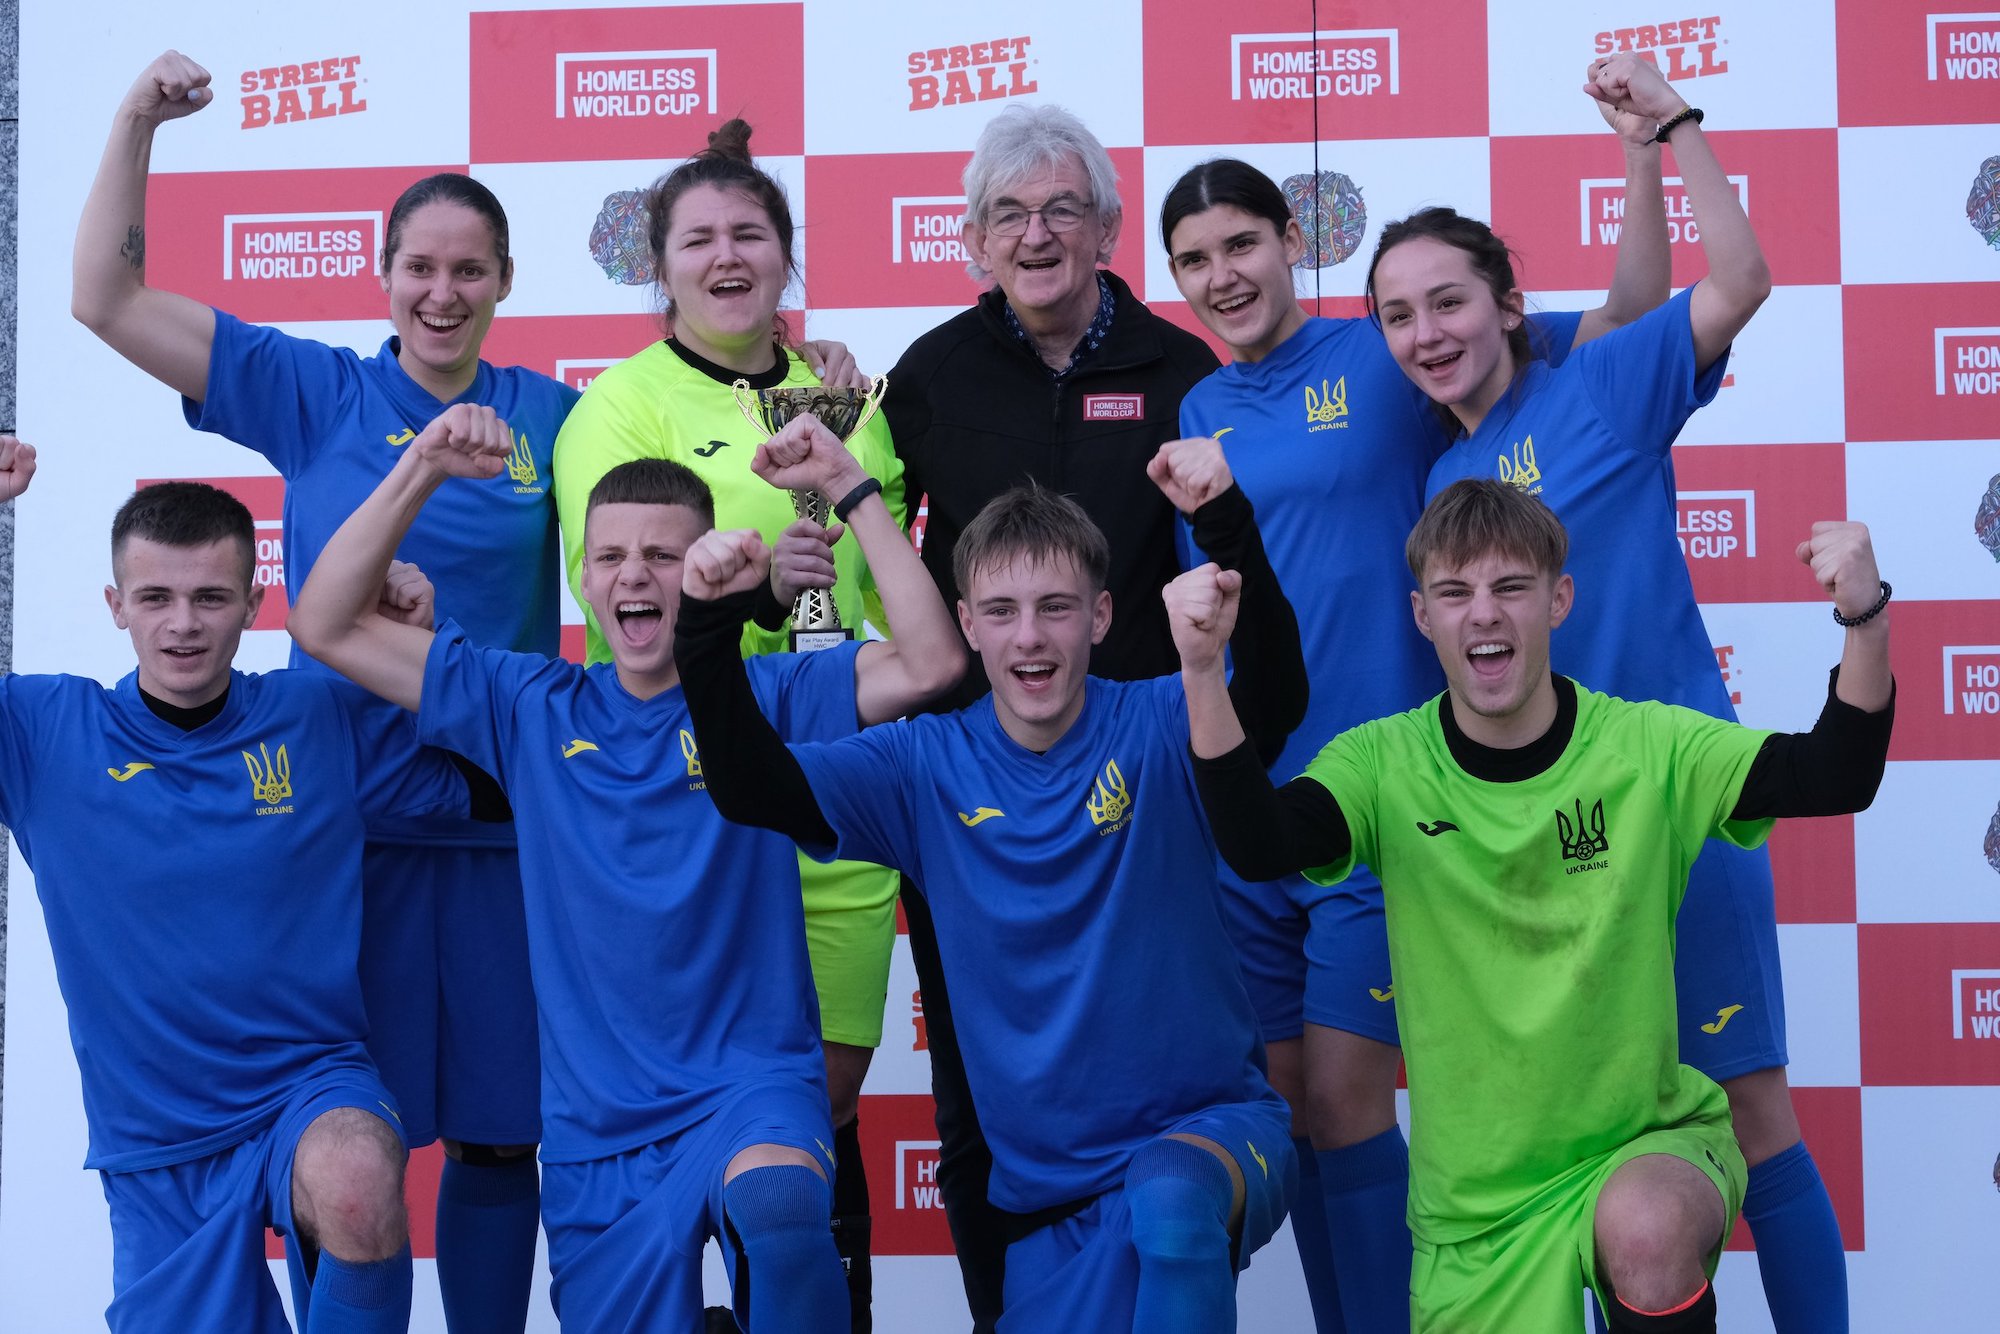 Five Scottish football clubs support Ukraine's journey to 2023 Homeless World Cup